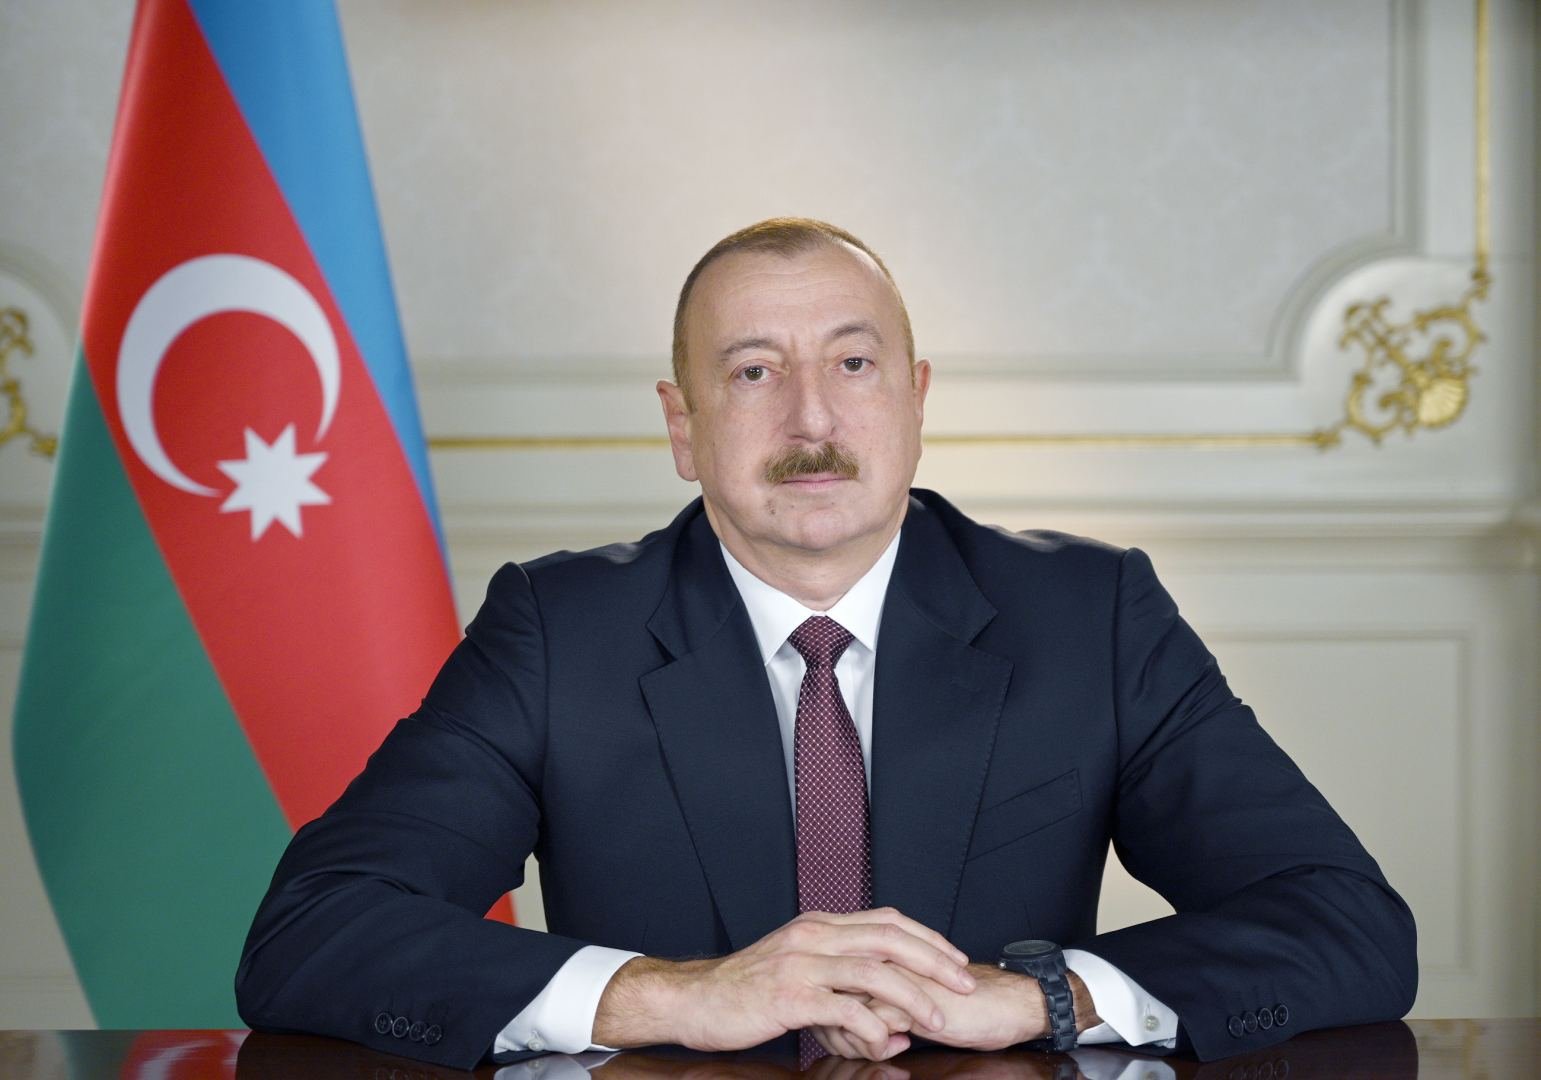 Combat experience of Azerbaijani Armed Forces is being carefully studied in military centers of developed countries now - President Ilham Aliyev